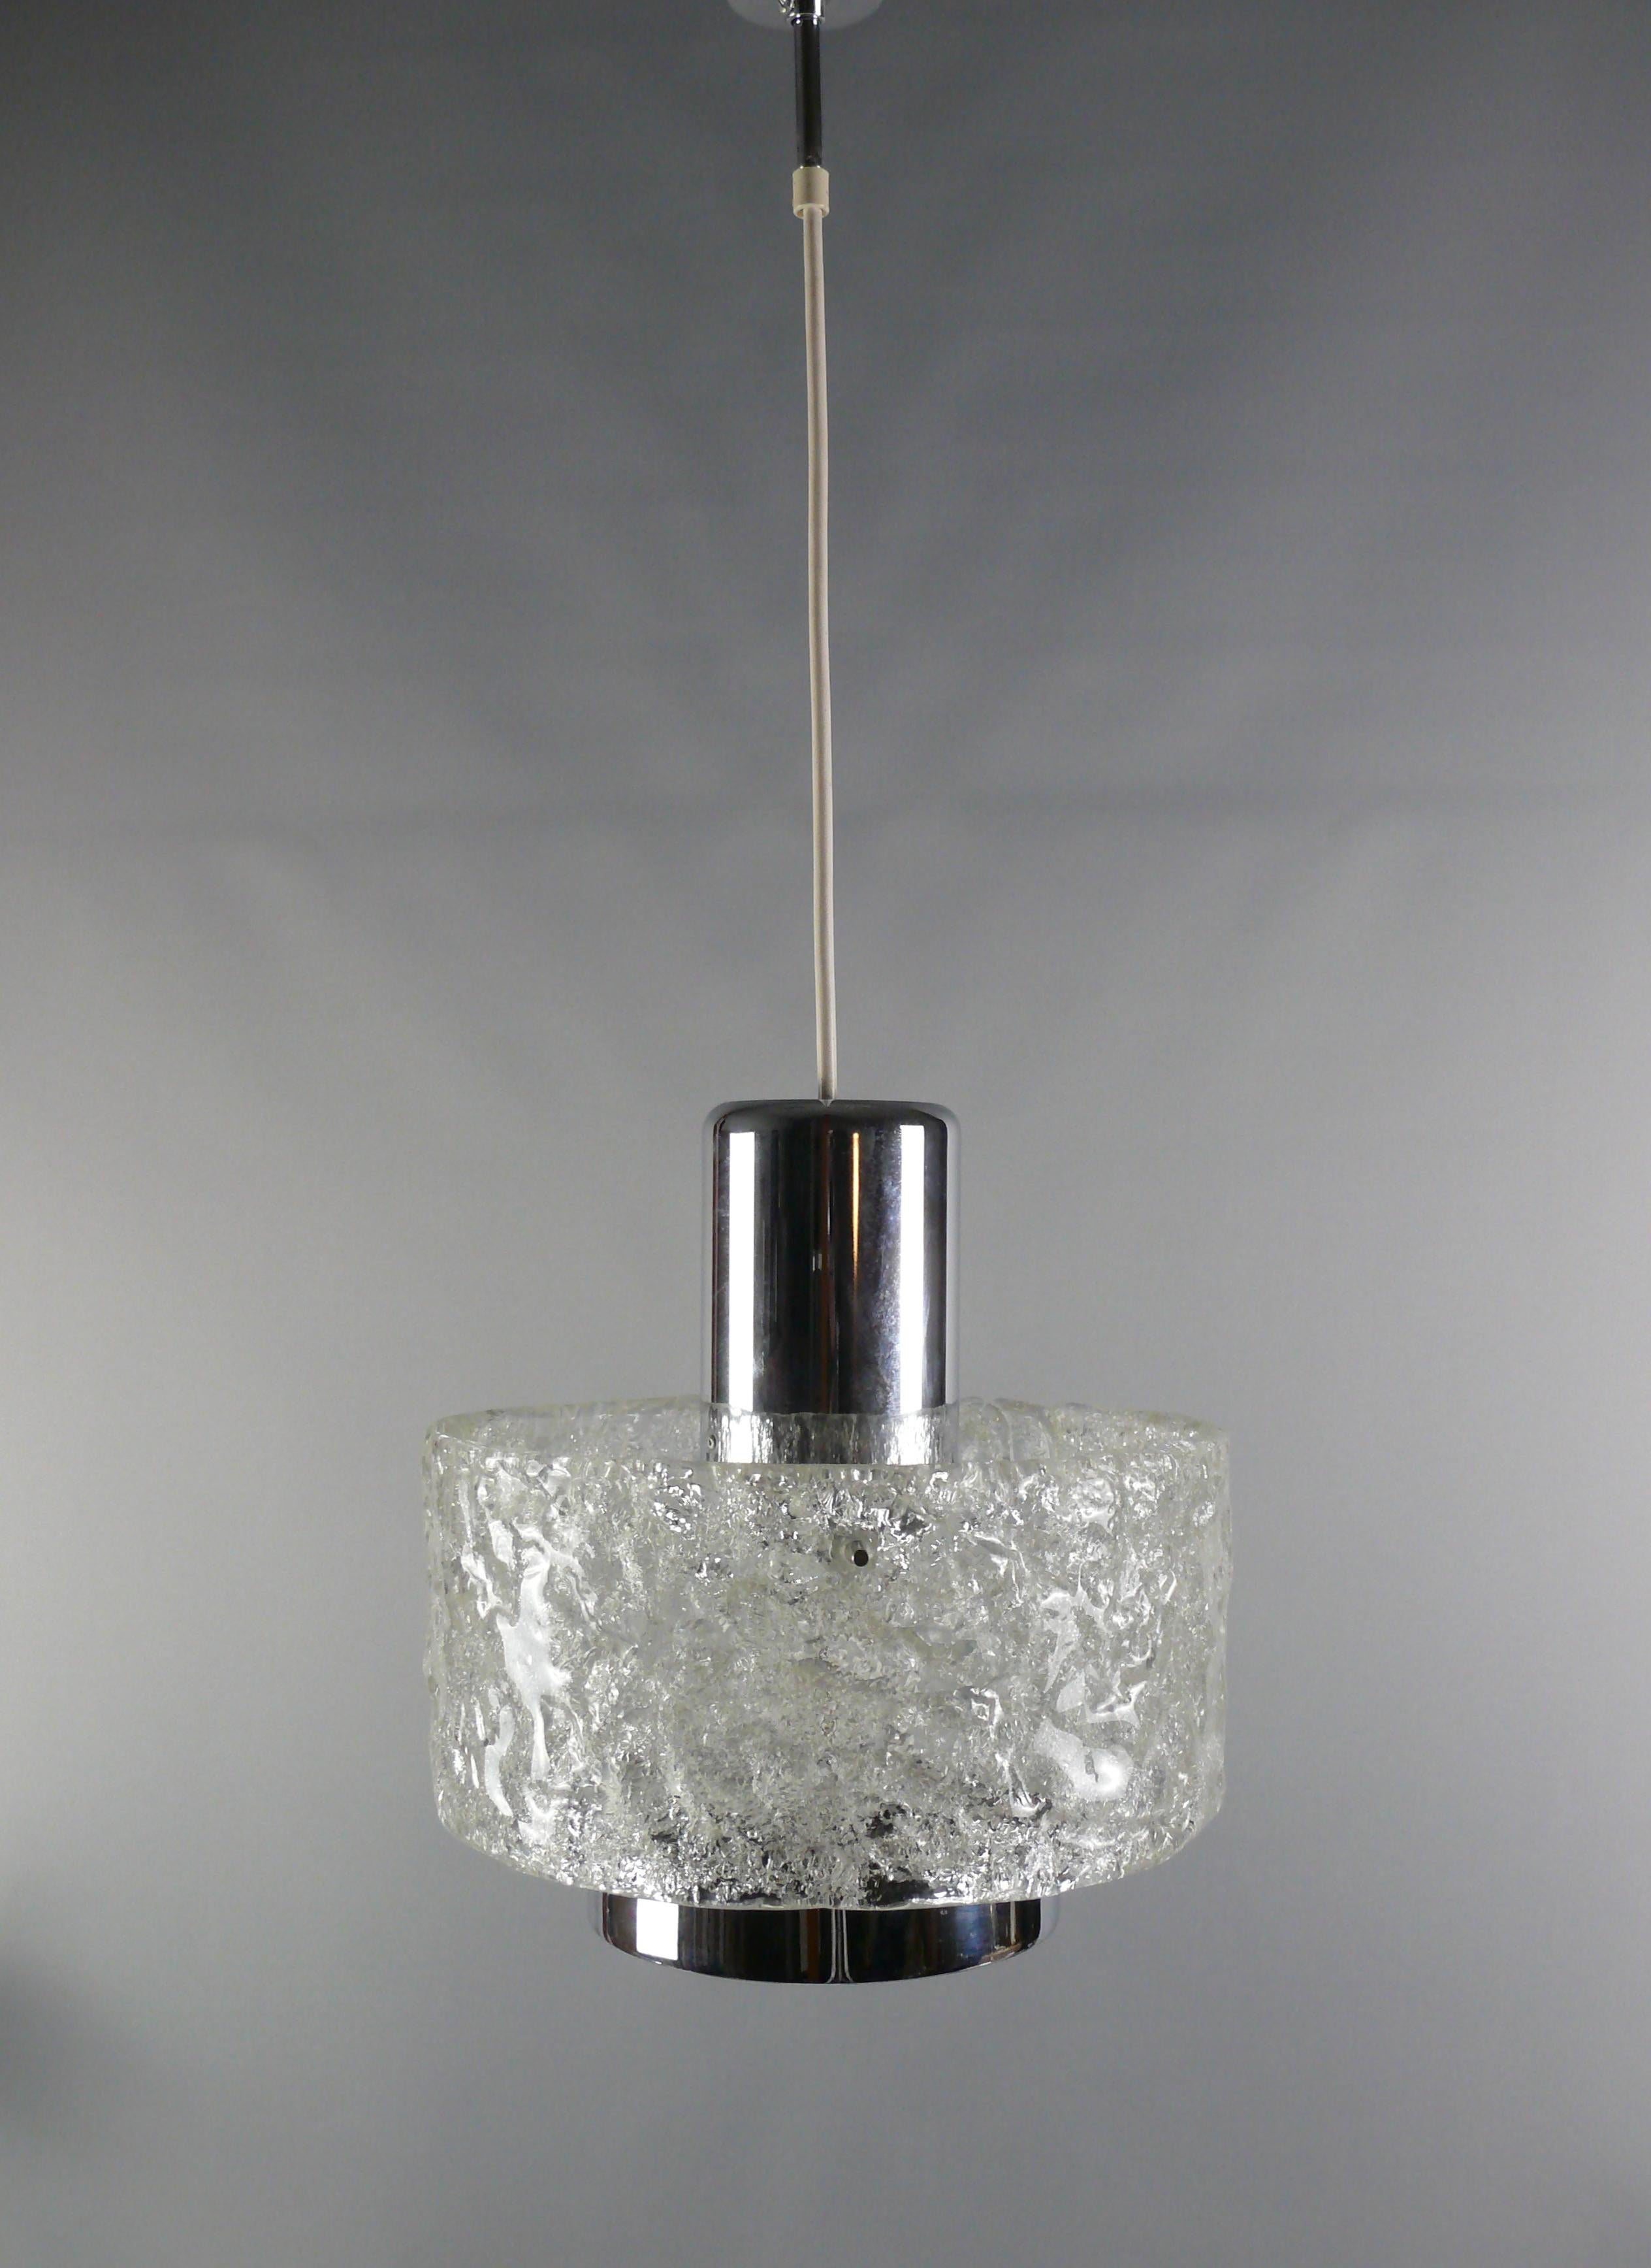 Very rare set of iceglass lamps made by Egon Hillebrand in Germany in the late 1960s. The pendant lamp consists of a large ice glass ring that is held by an elaborate chrome-plated suspension. The glass shade is attached to the suspension with three